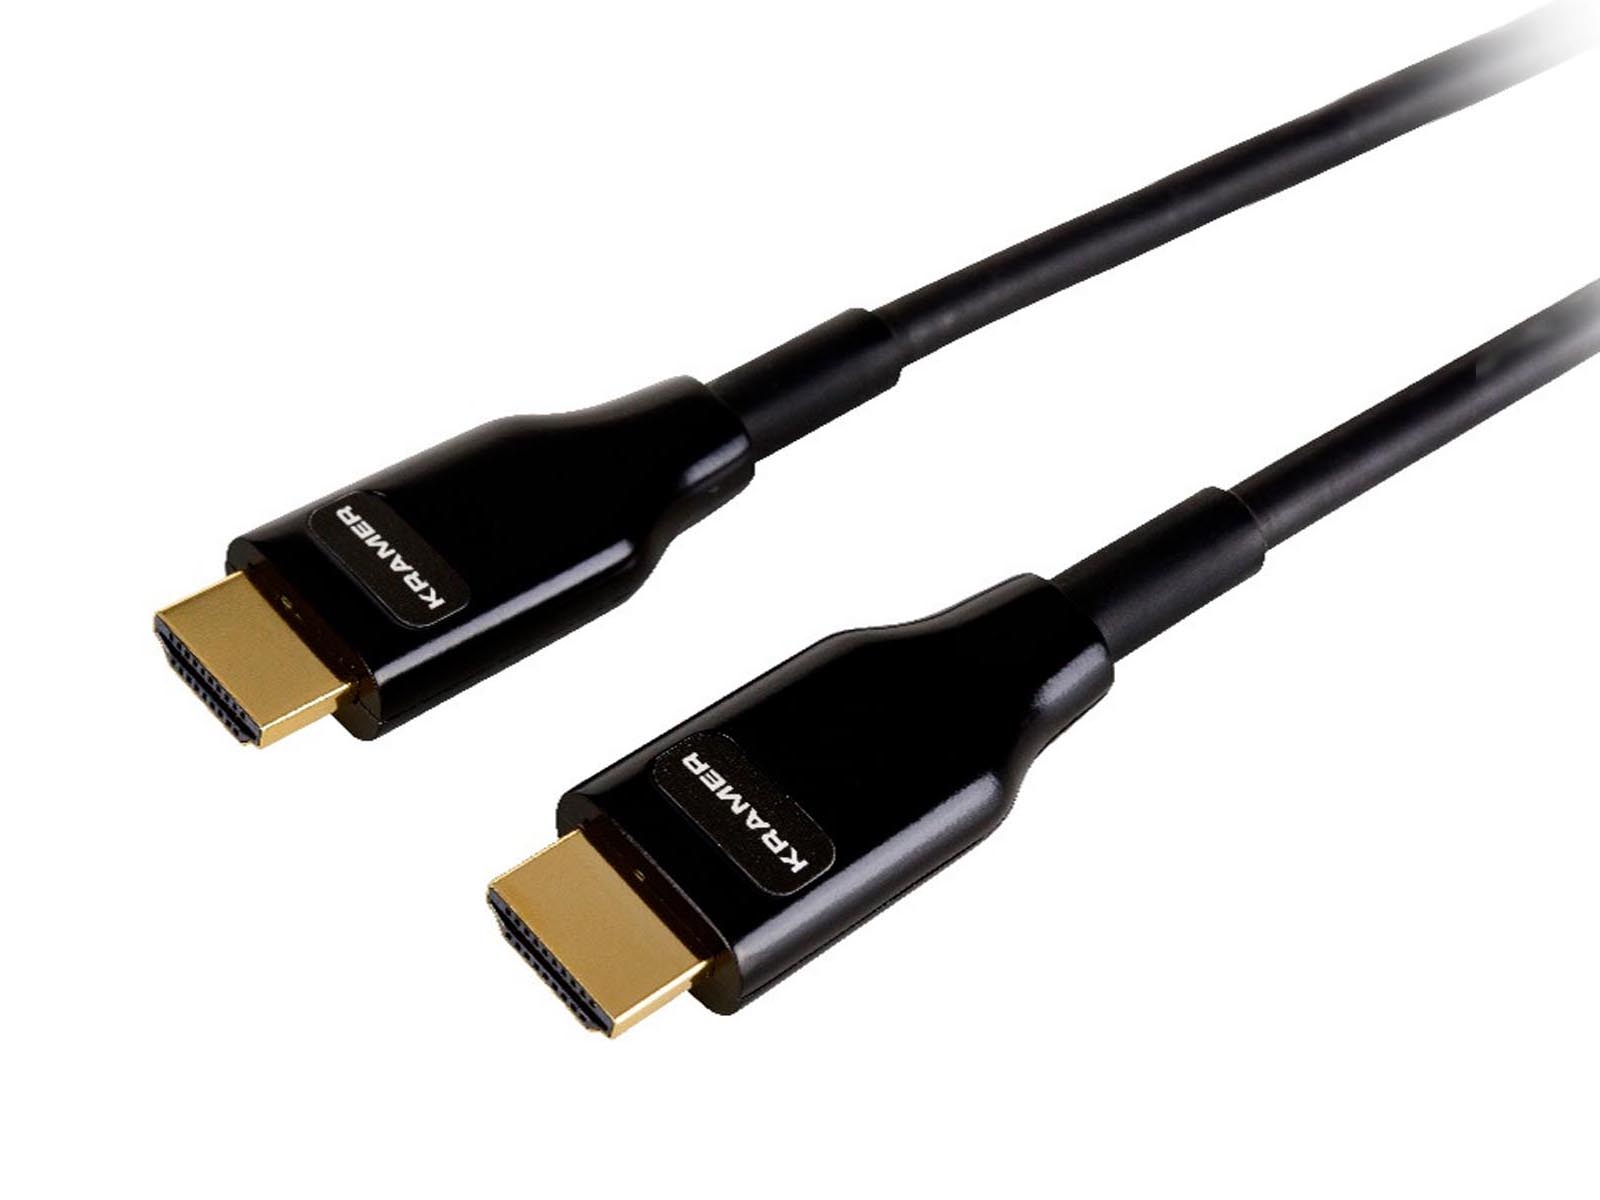 CRS-PlugNView-H-66 Active Optical Armored 4K HDMI Cable - 66ft (20m) by Kramer